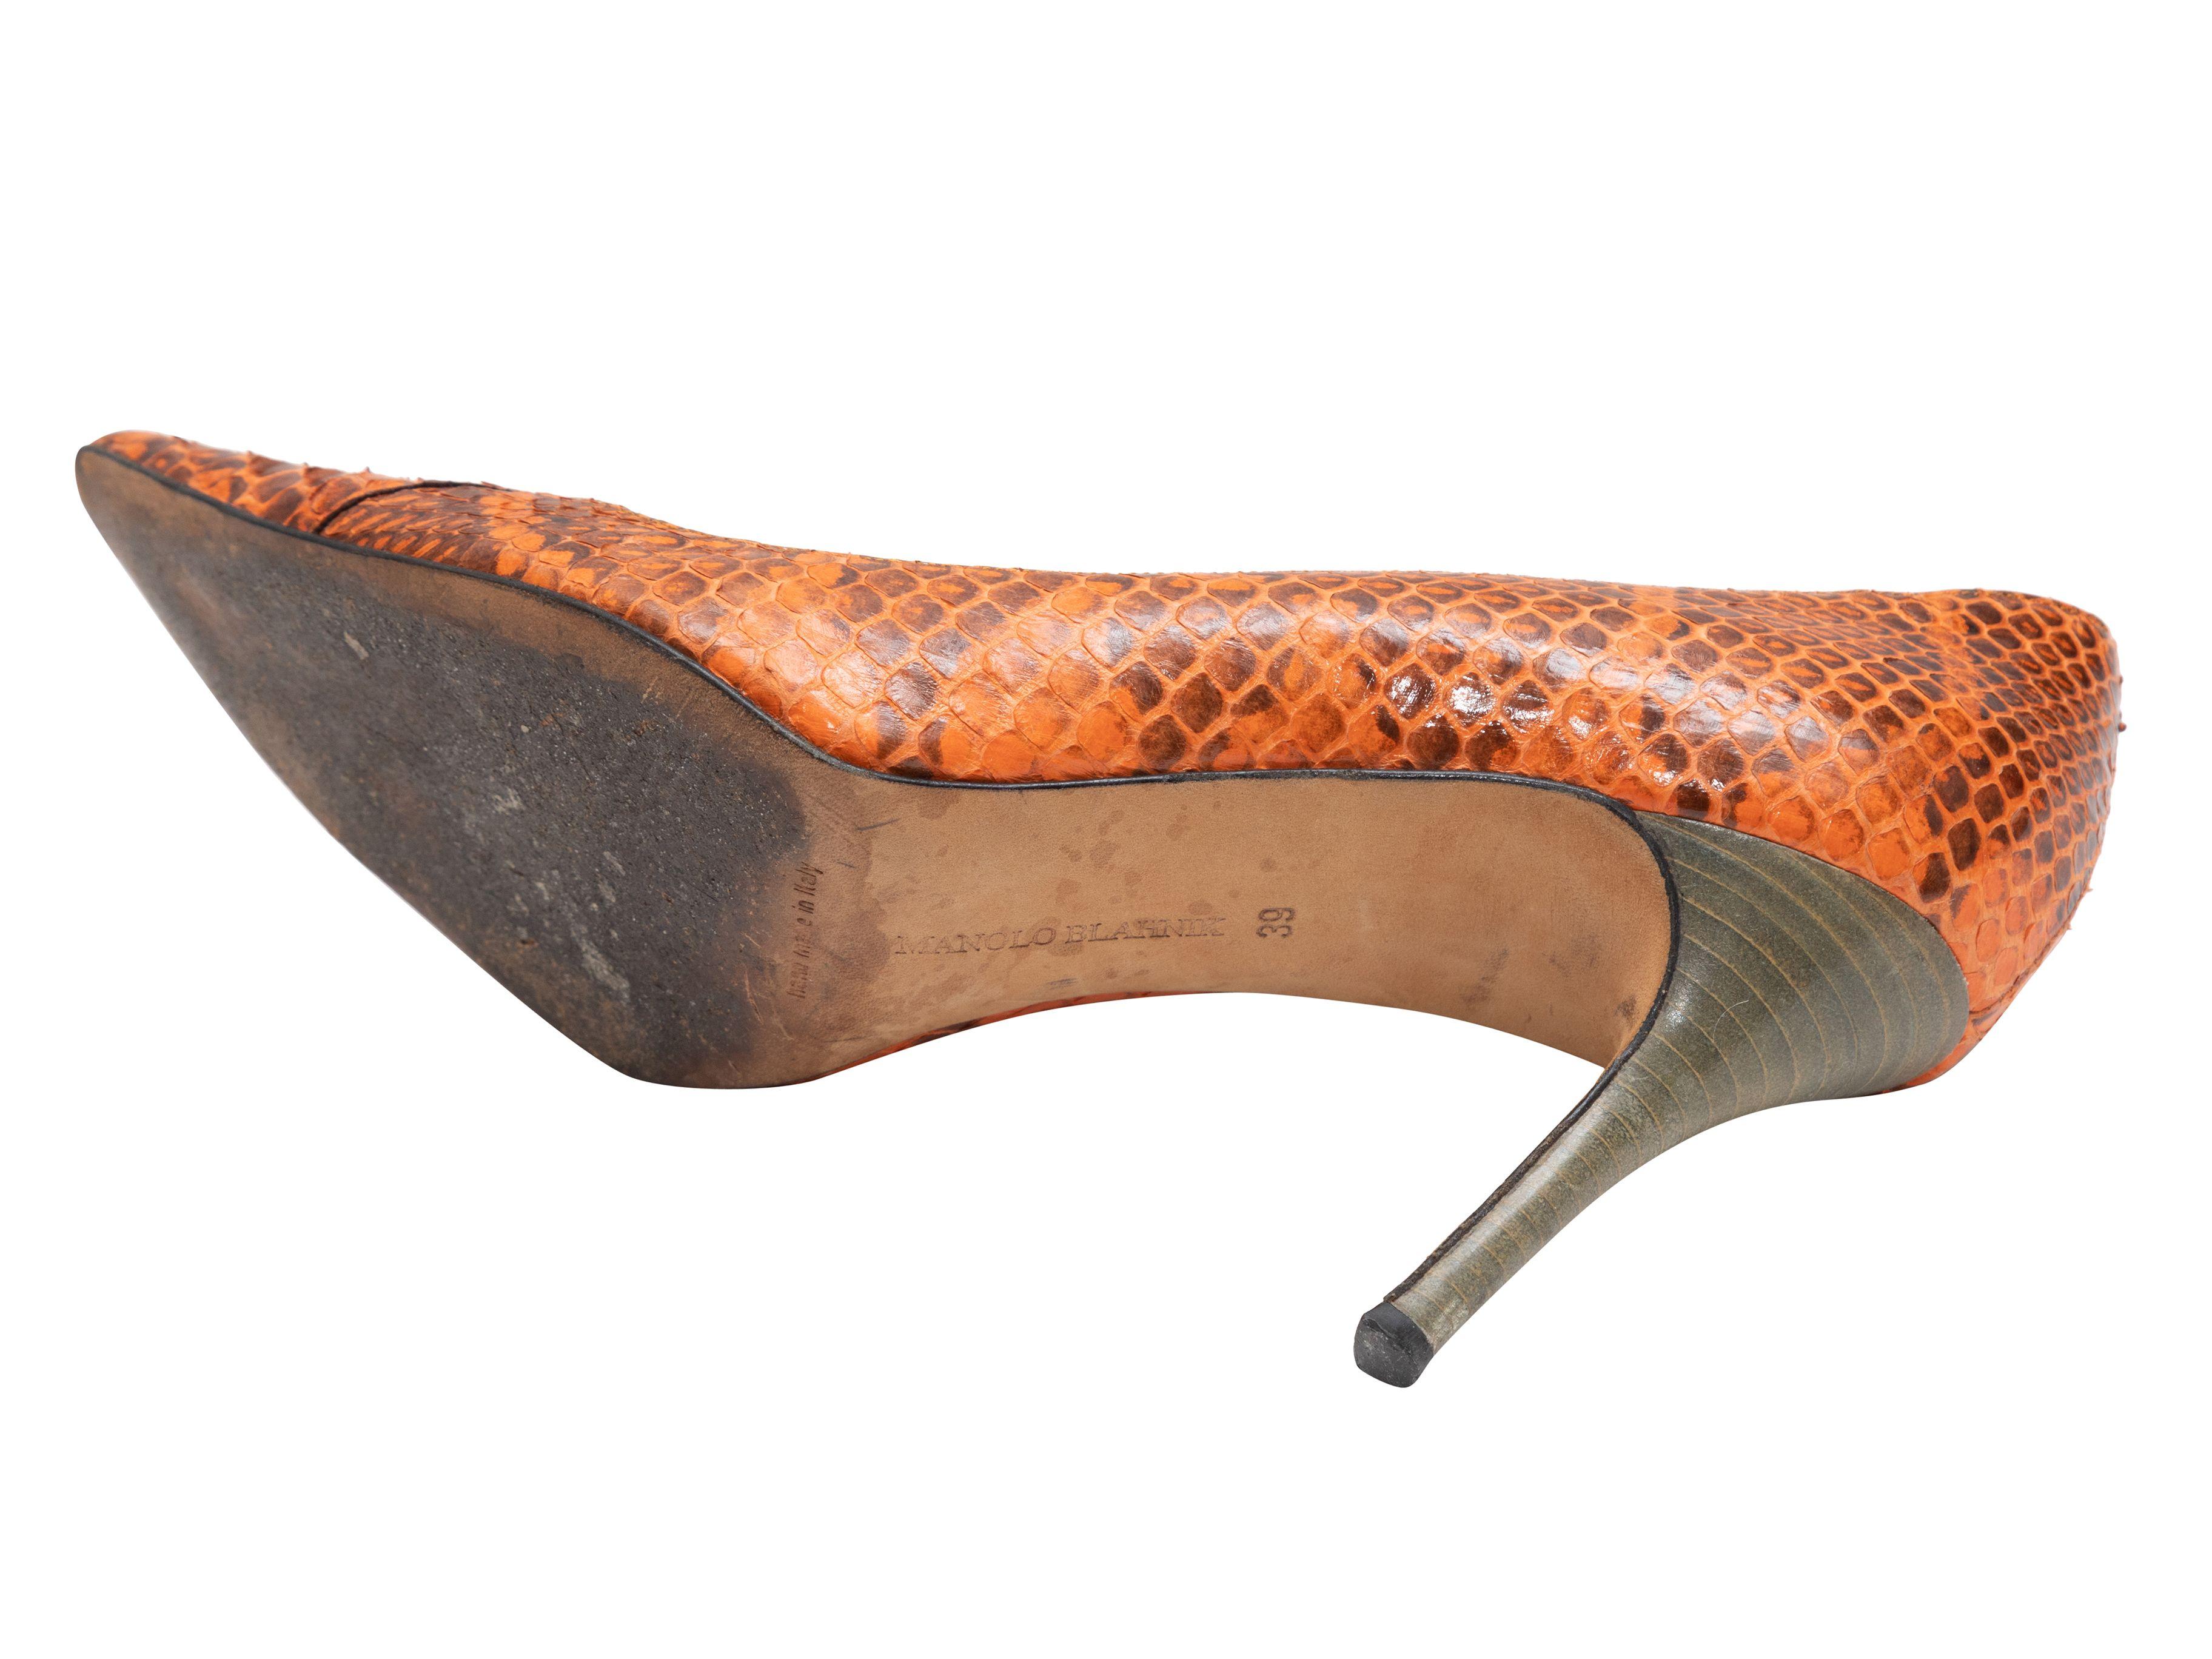 Product Details: Orange and brown snakeskin pointed-toe pumps by Manolo Blahnik. Stacked heels. 3.5